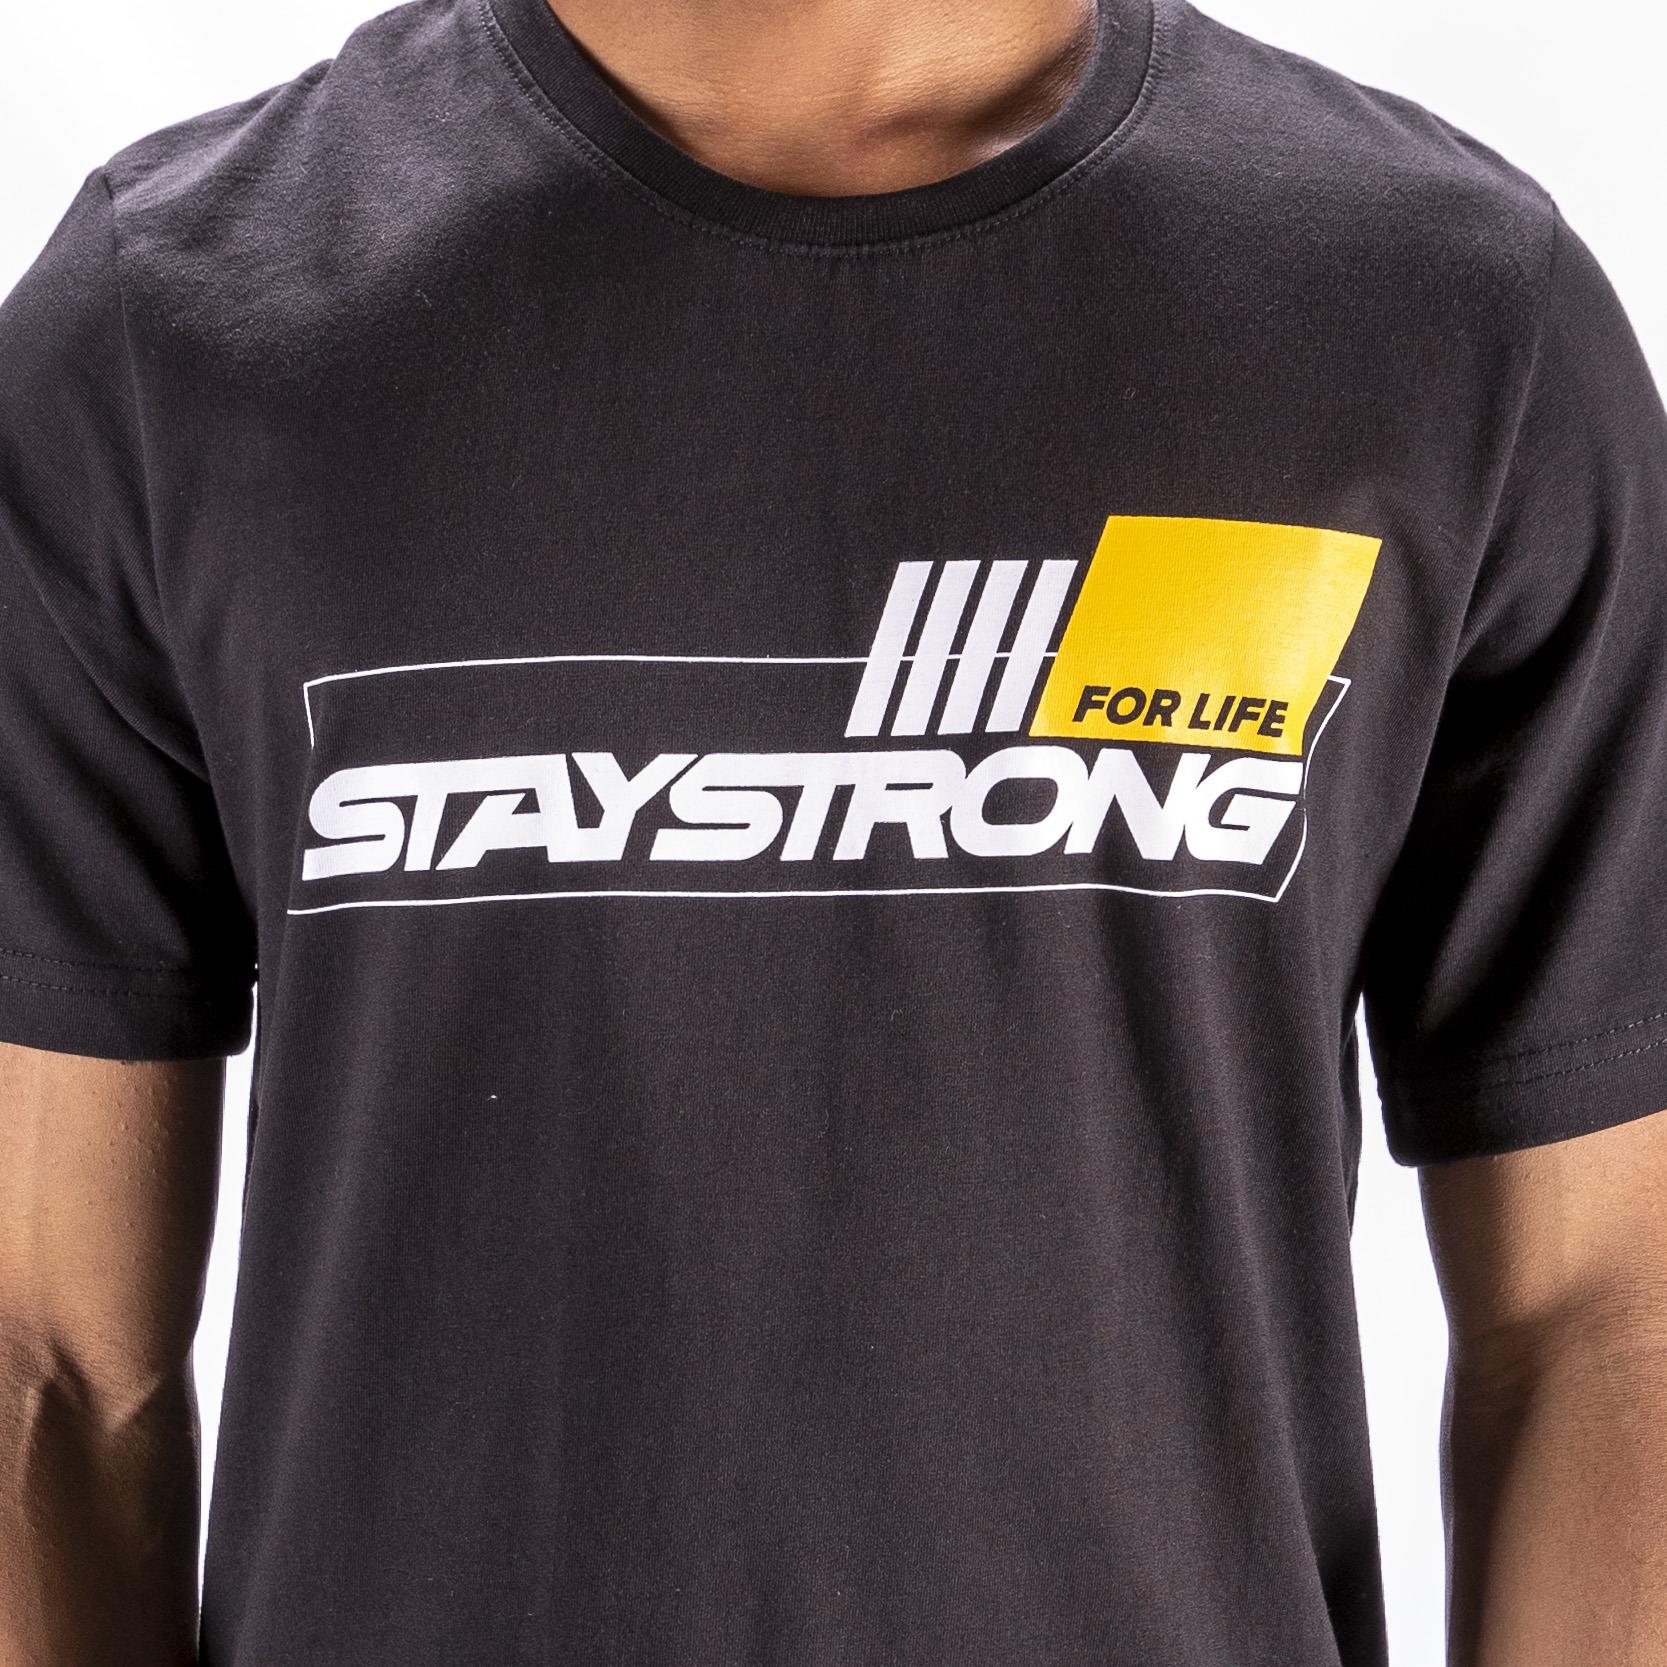 Stay Strong For Life T-Shirt - Black